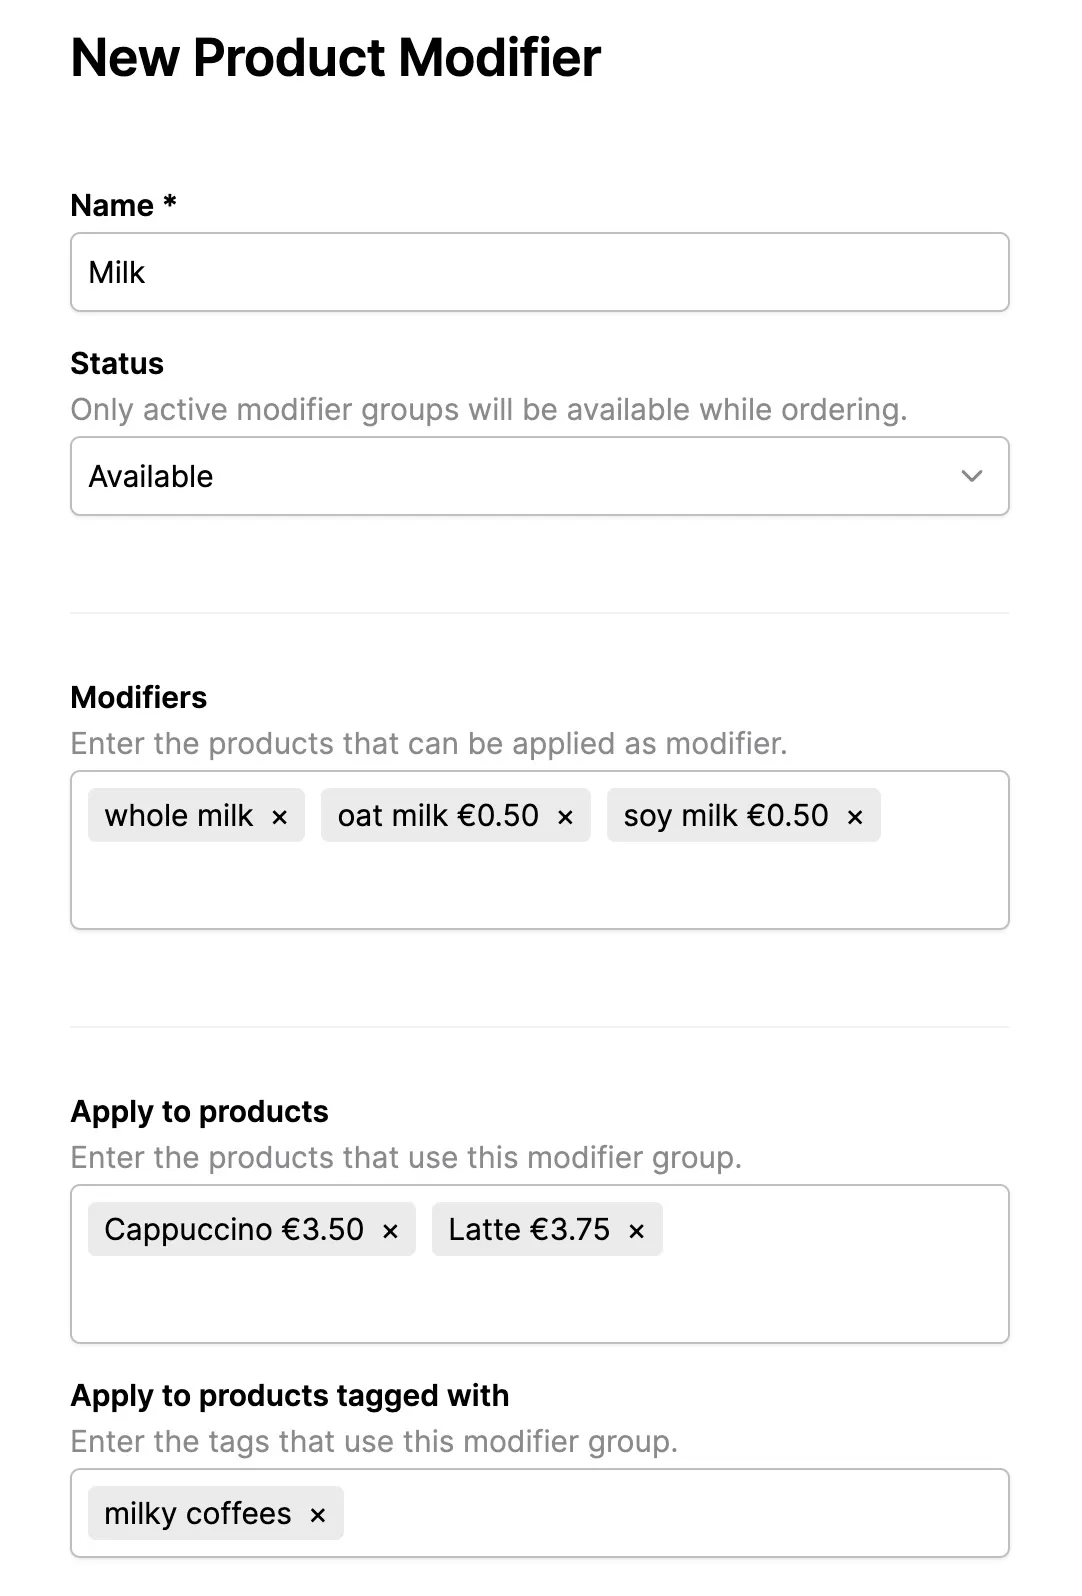 The New Product Modifier page where to input all information